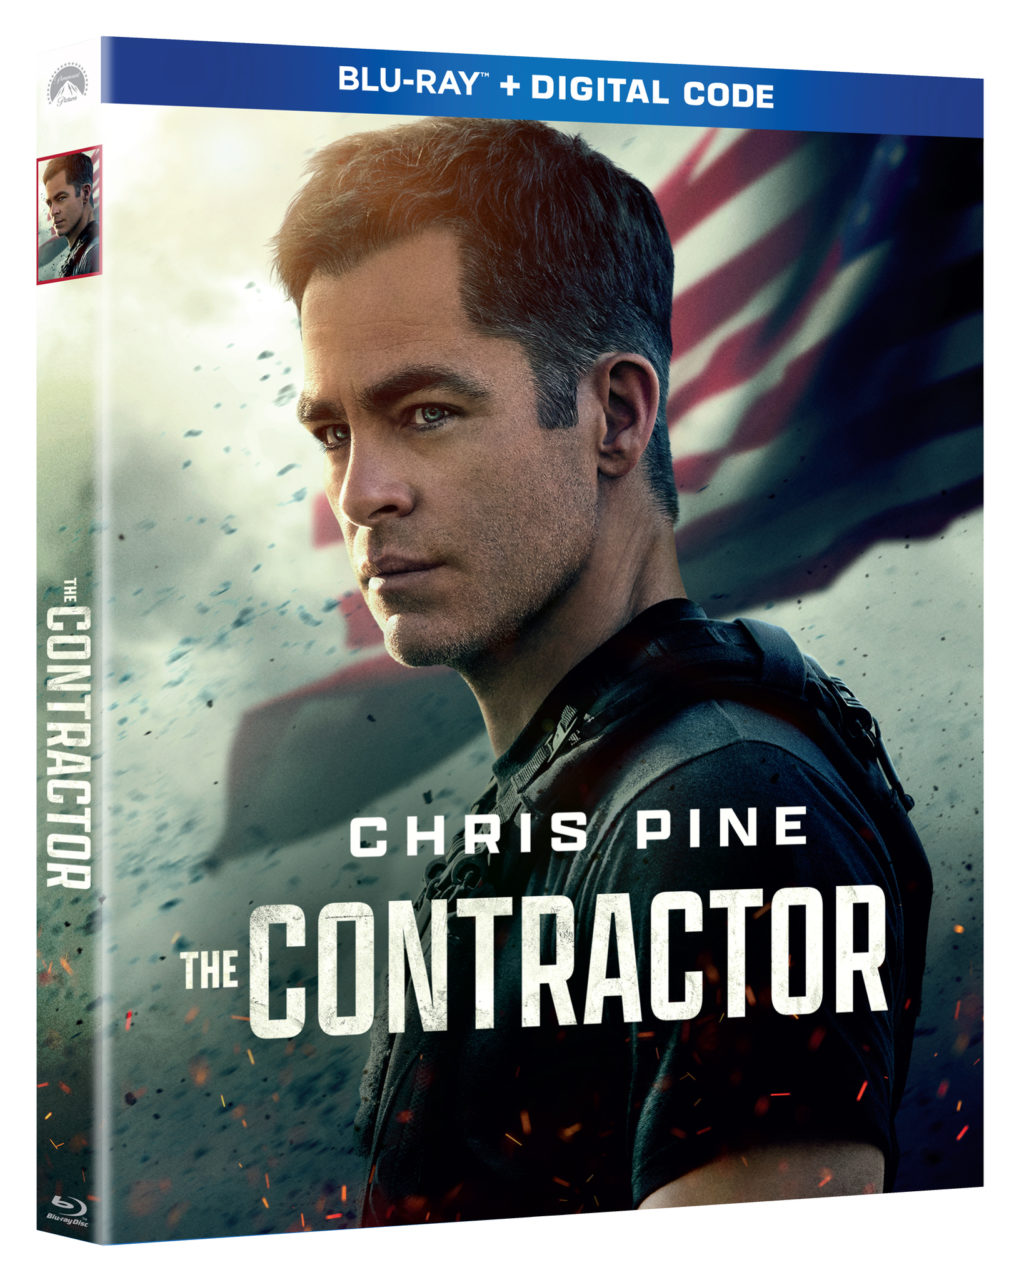 The Contractor Blu-Ray Combo Pack cover (Paramount Home Entertainment)